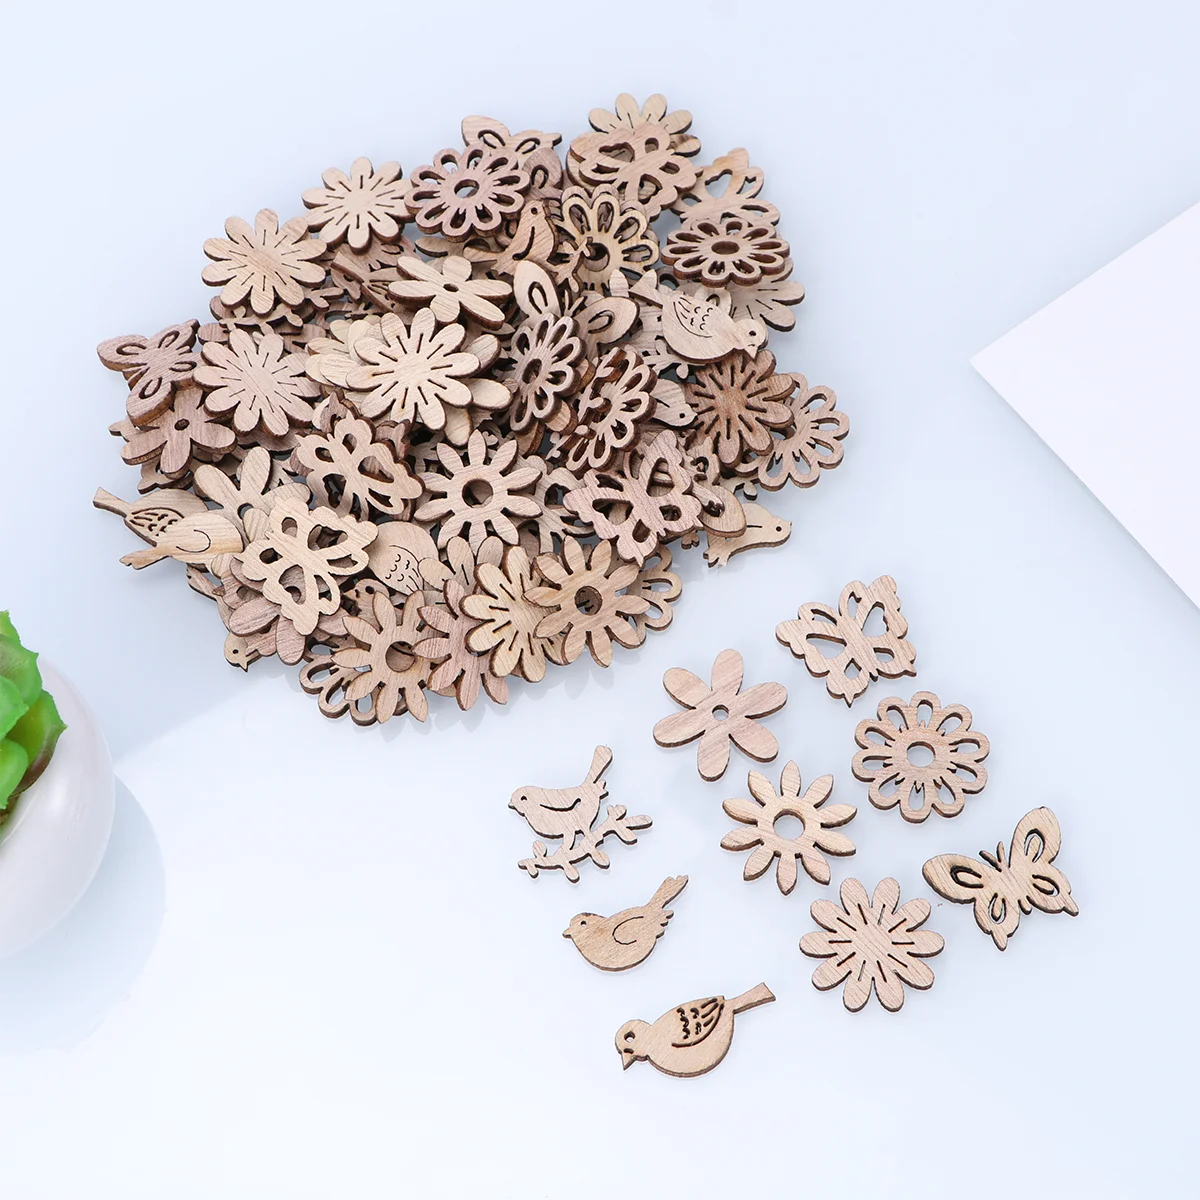 

Wood Wooden Cutouts Craft Unfinished Shapes Pieces Crafts Diy Christmas Flower Slices Embellishments Blank Tag Ornaments Table